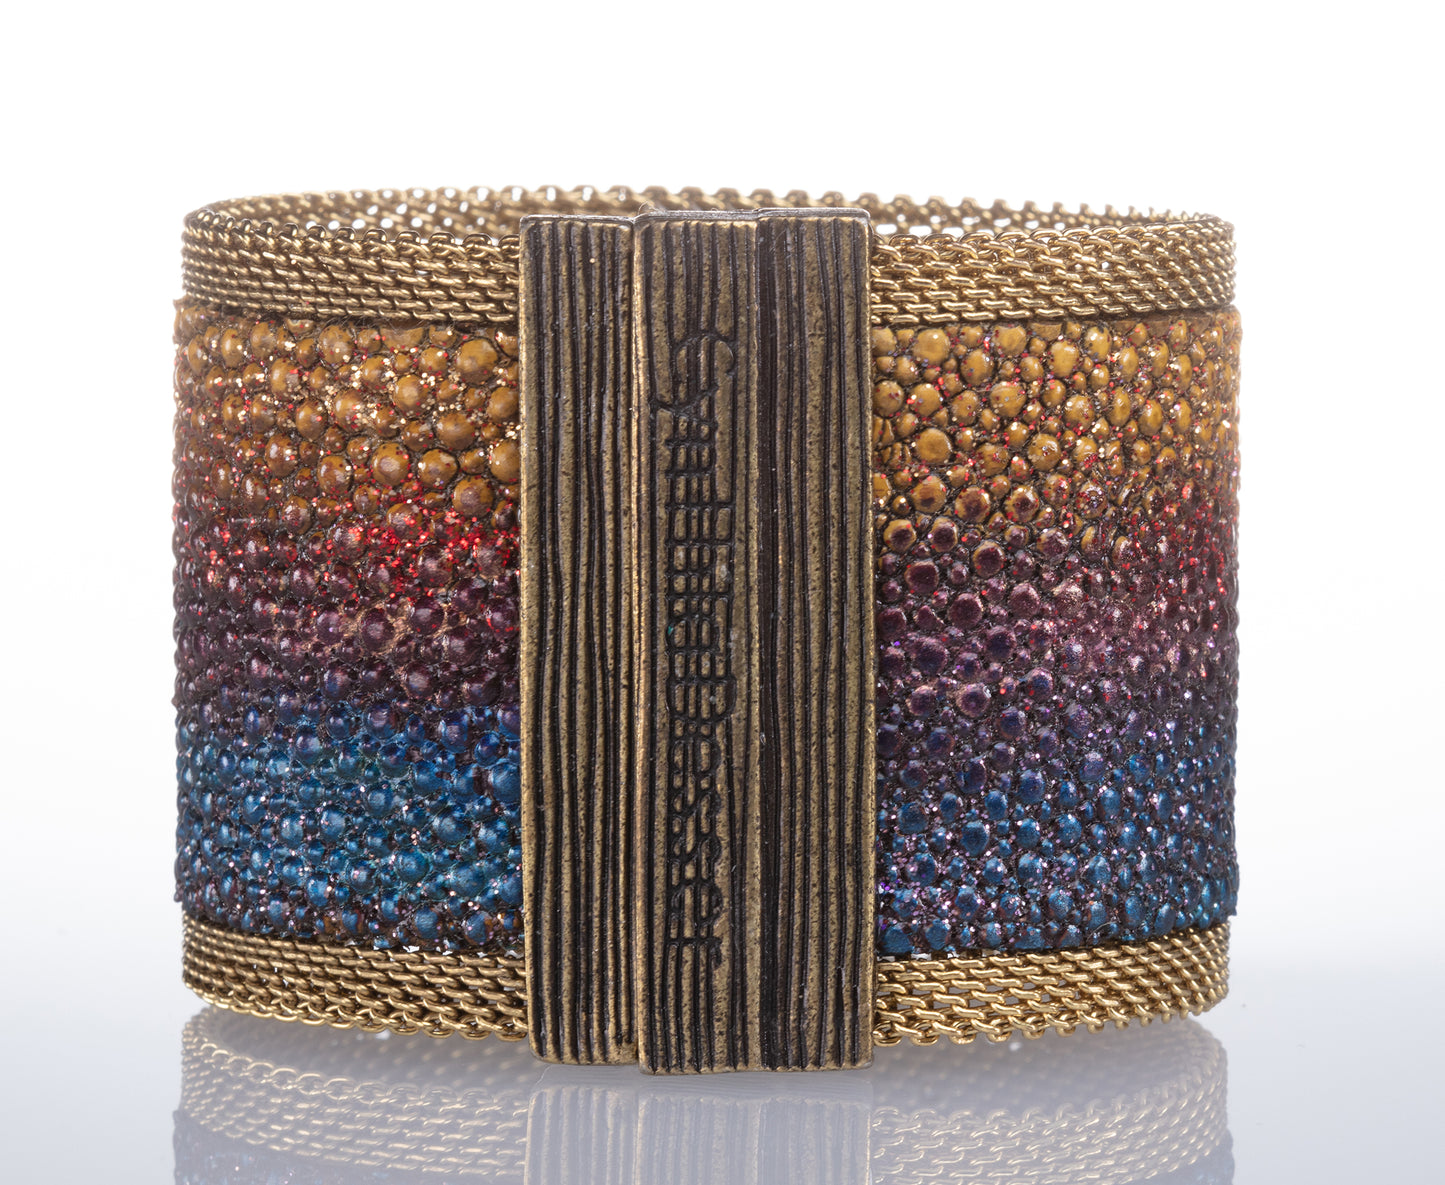 Stingray Cuff, Limited Edition of 3; Hand Painted Shimmery Deep Rainbow Tones